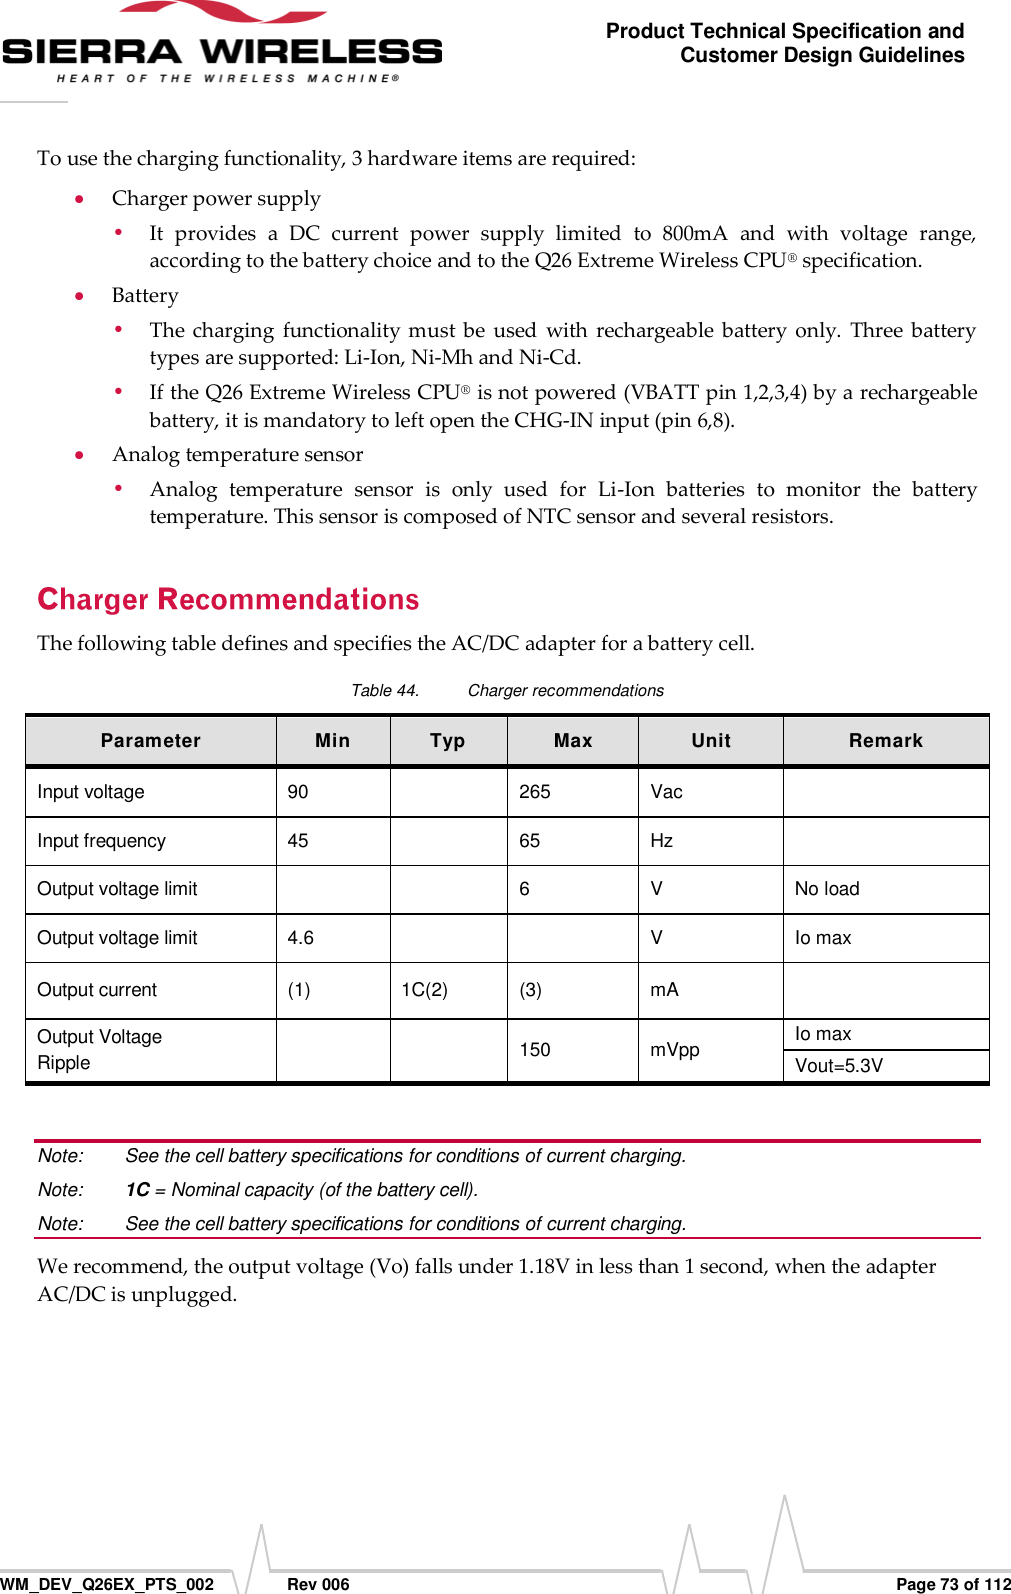      WM_DEV_Q26EX_PTS_002  Rev 006  Page 73 of 112 Product Technical Specification and Customer Design Guidelines To use the charging functionality, 3 hardware items are required:  Charger power supply  It  provides  a  DC  current  power  supply  limited  to  800mA  and  with  voltage  range, according to the battery choice and to the Q26 Extreme Wireless CPU® specification.  Battery   The charging  functionality  must be  used  with  rechargeable  battery  only.  Three battery types are supported: Li-Ion, Ni-Mh and Ni-Cd.  If the Q26 Extreme Wireless CPU® is not powered (VBATT pin 1,2,3,4) by a rechargeable battery, it is mandatory to left open the CHG-IN input (pin 6,8).  Analog temperature sensor  Analog  temperature  sensor  is  only  used  for  Li-Ion  batteries  to  monitor  the  battery temperature. This sensor is composed of NTC sensor and several resistors. The following table defines and specifies the AC/DC adapter for a battery cell. Table 44.  Charger recommendations Parameter Min Typ Max Unit Remark Input voltage 90  265 Vac  Input frequency 45  65 Hz  Output voltage limit   6 V No load Output voltage limit 4.6   V Io max Output current (1) 1C(2) (3) mA  Output Voltage Ripple   150 mVpp Io max Vout=5.3V  Note:   See the cell battery specifications for conditions of current charging. Note:   1C = Nominal capacity (of the battery cell). Note:   See the cell battery specifications for conditions of current charging. We recommend, the output voltage (Vo) falls under 1.18V in less than 1 second, when the adapter AC/DC is unplugged. 